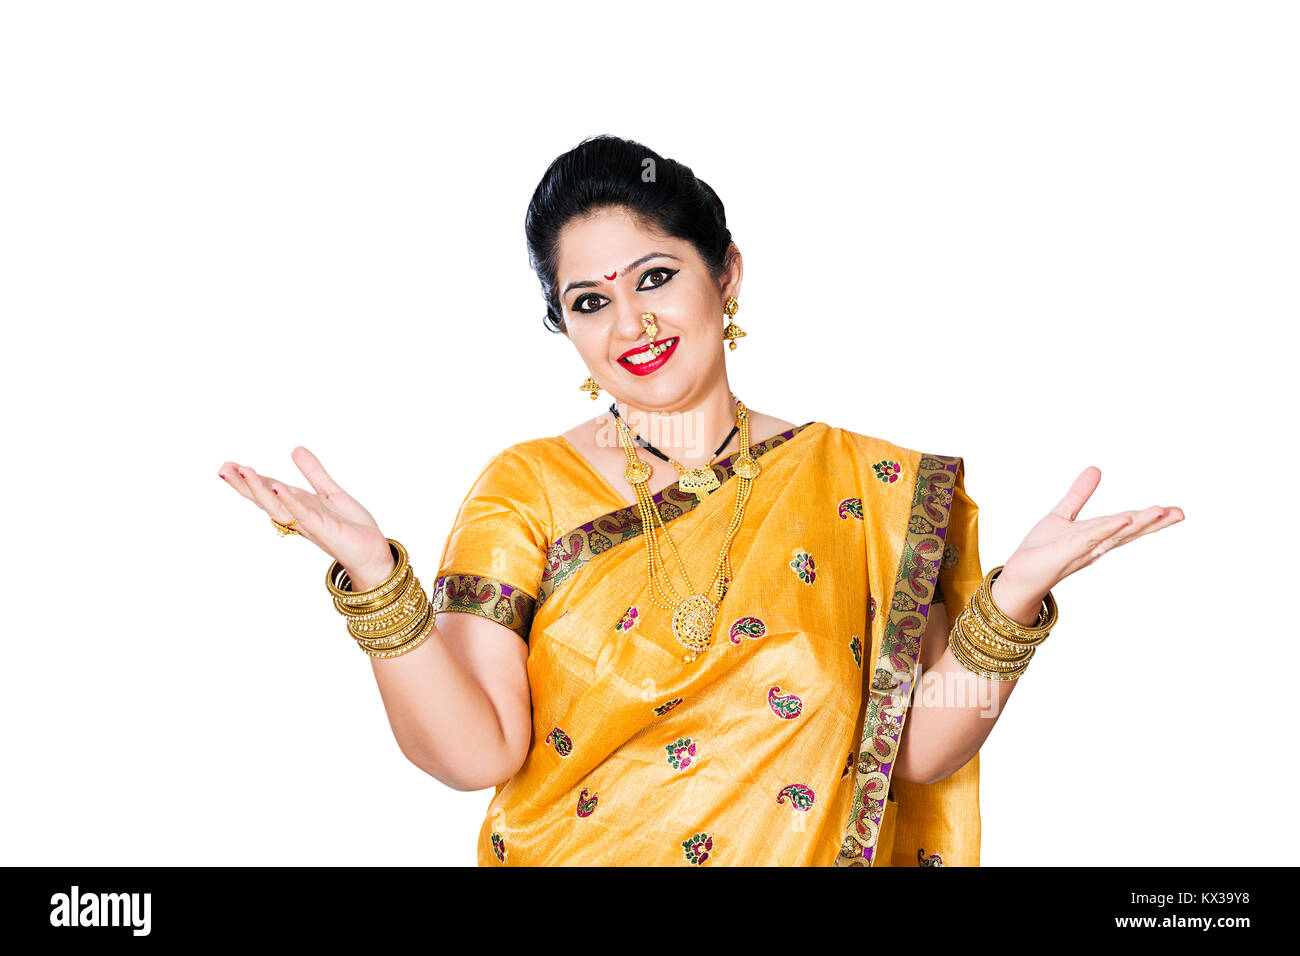 Indian Traditional Marathi Woman Hand Gesturing Showing Smiling Stock Photo